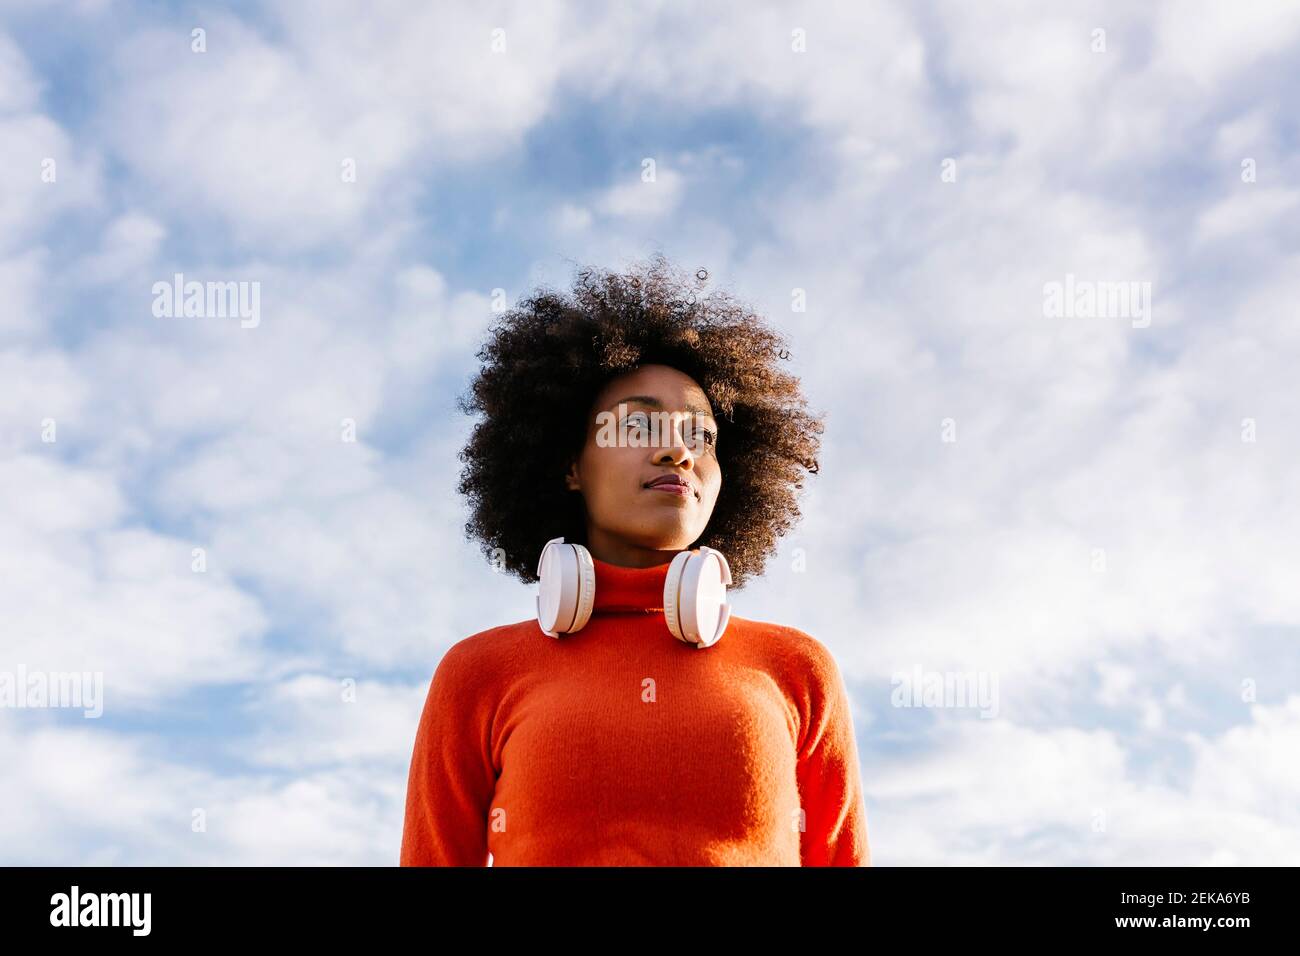 Contemplating Afro woman looking away against cloudy sky Stock Photo